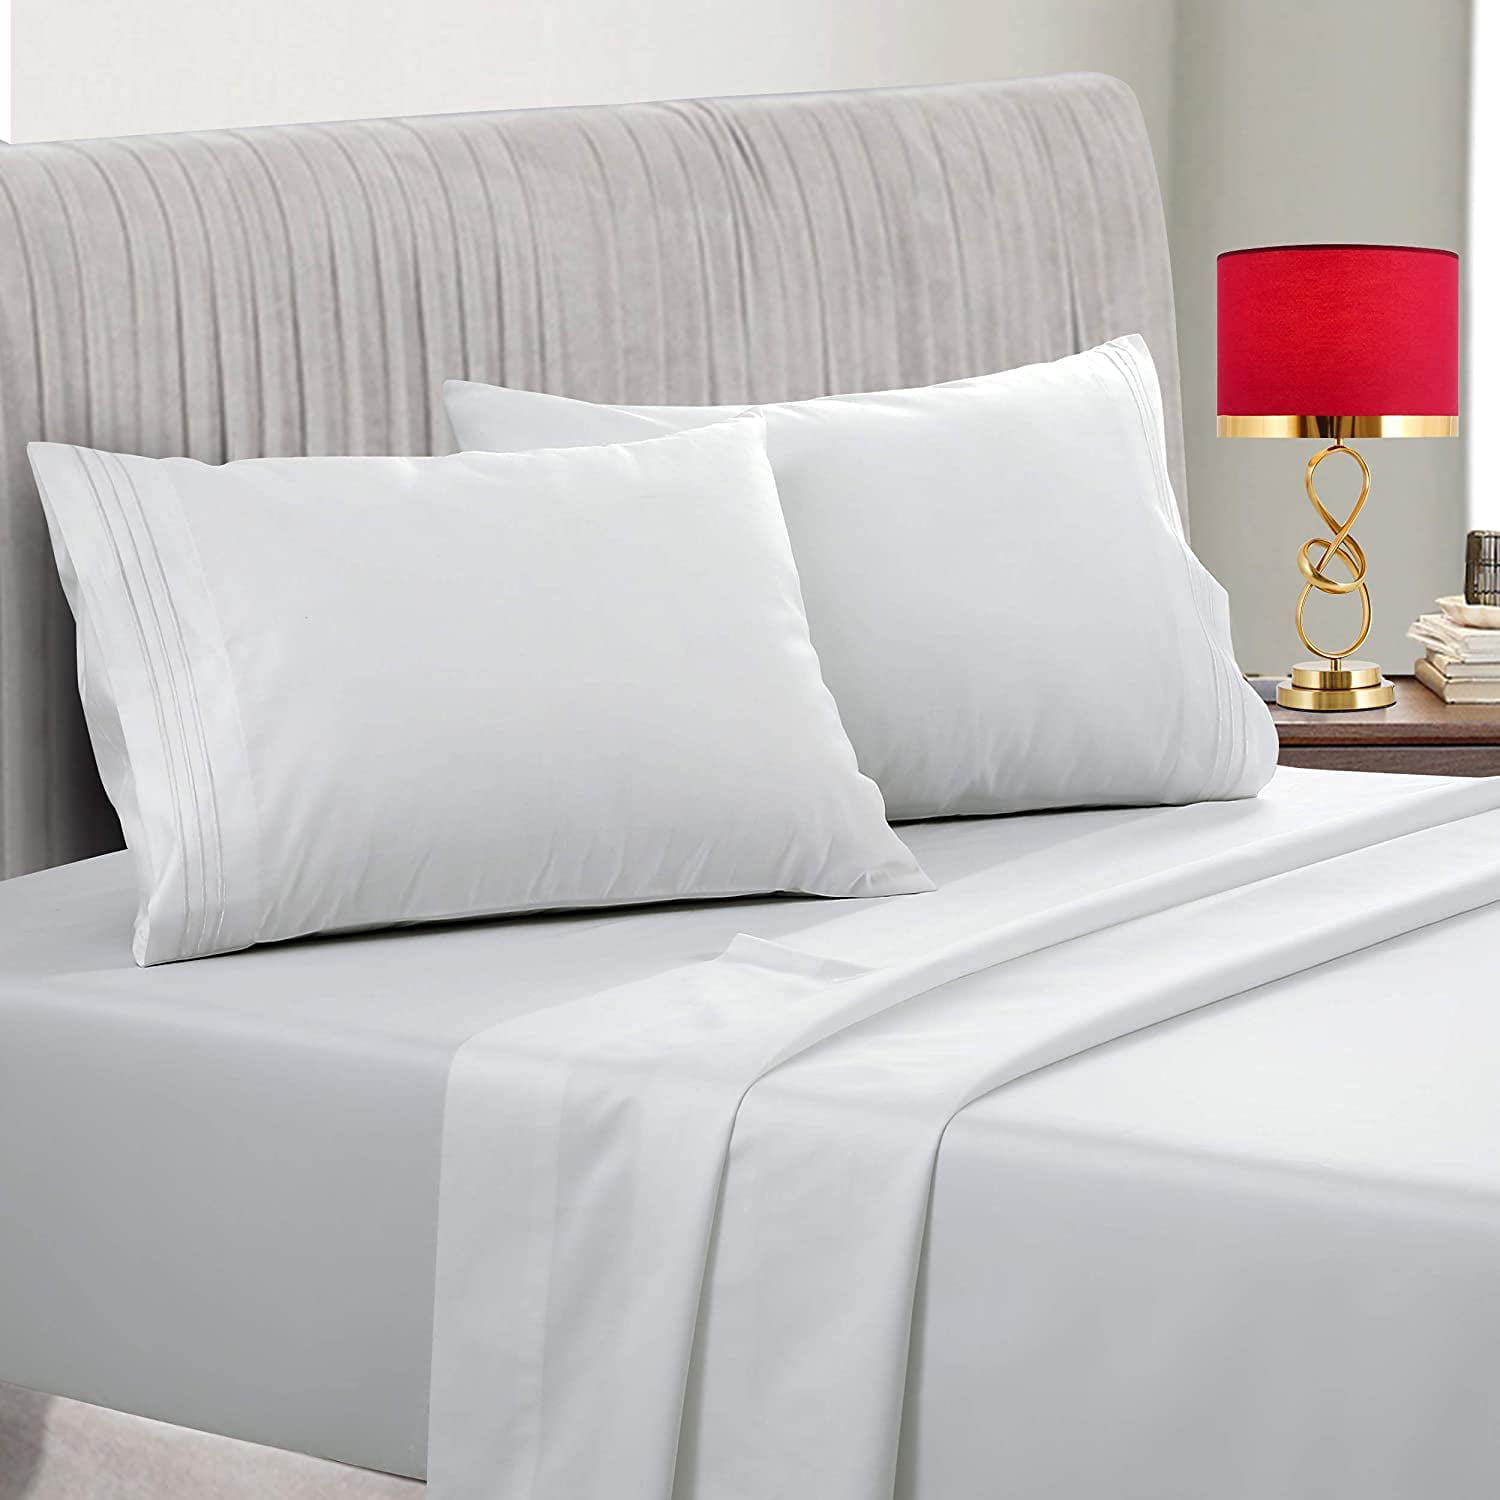 Luxury Fitted Sheet 400TC Deep Fitted Bed Sheet Bedding 100% Cotton Plain Sheet